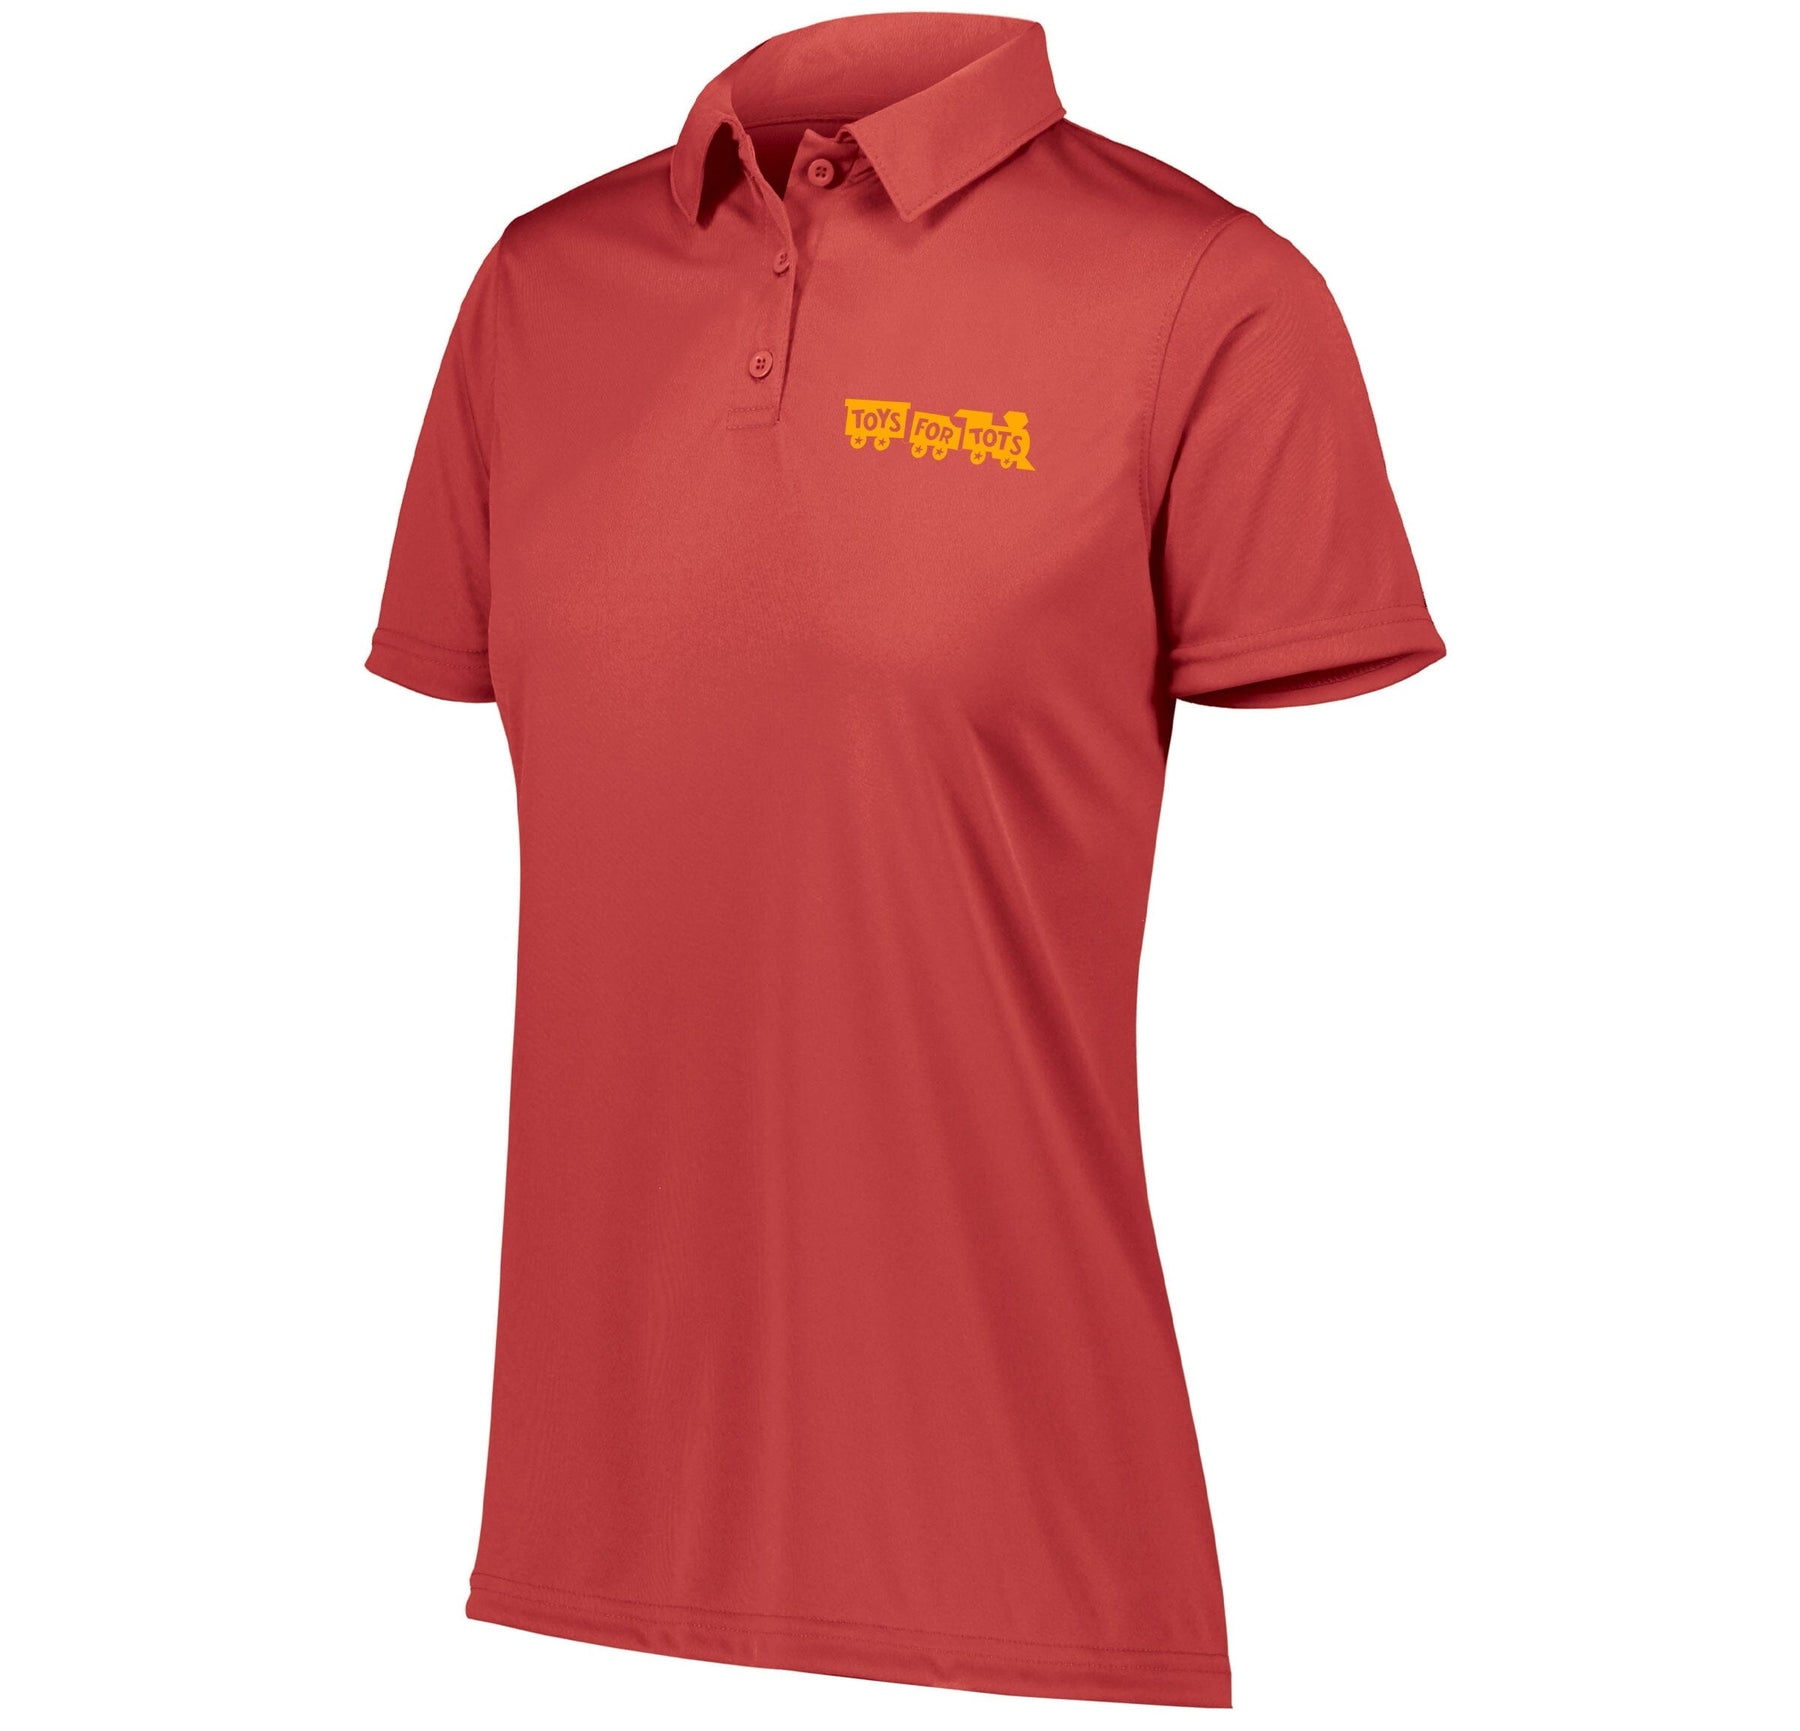 Gold TFT Chest Seal Screen-Printed Dri-Fit Performance Women's Polo Polo Marine Corps Direct S RED 